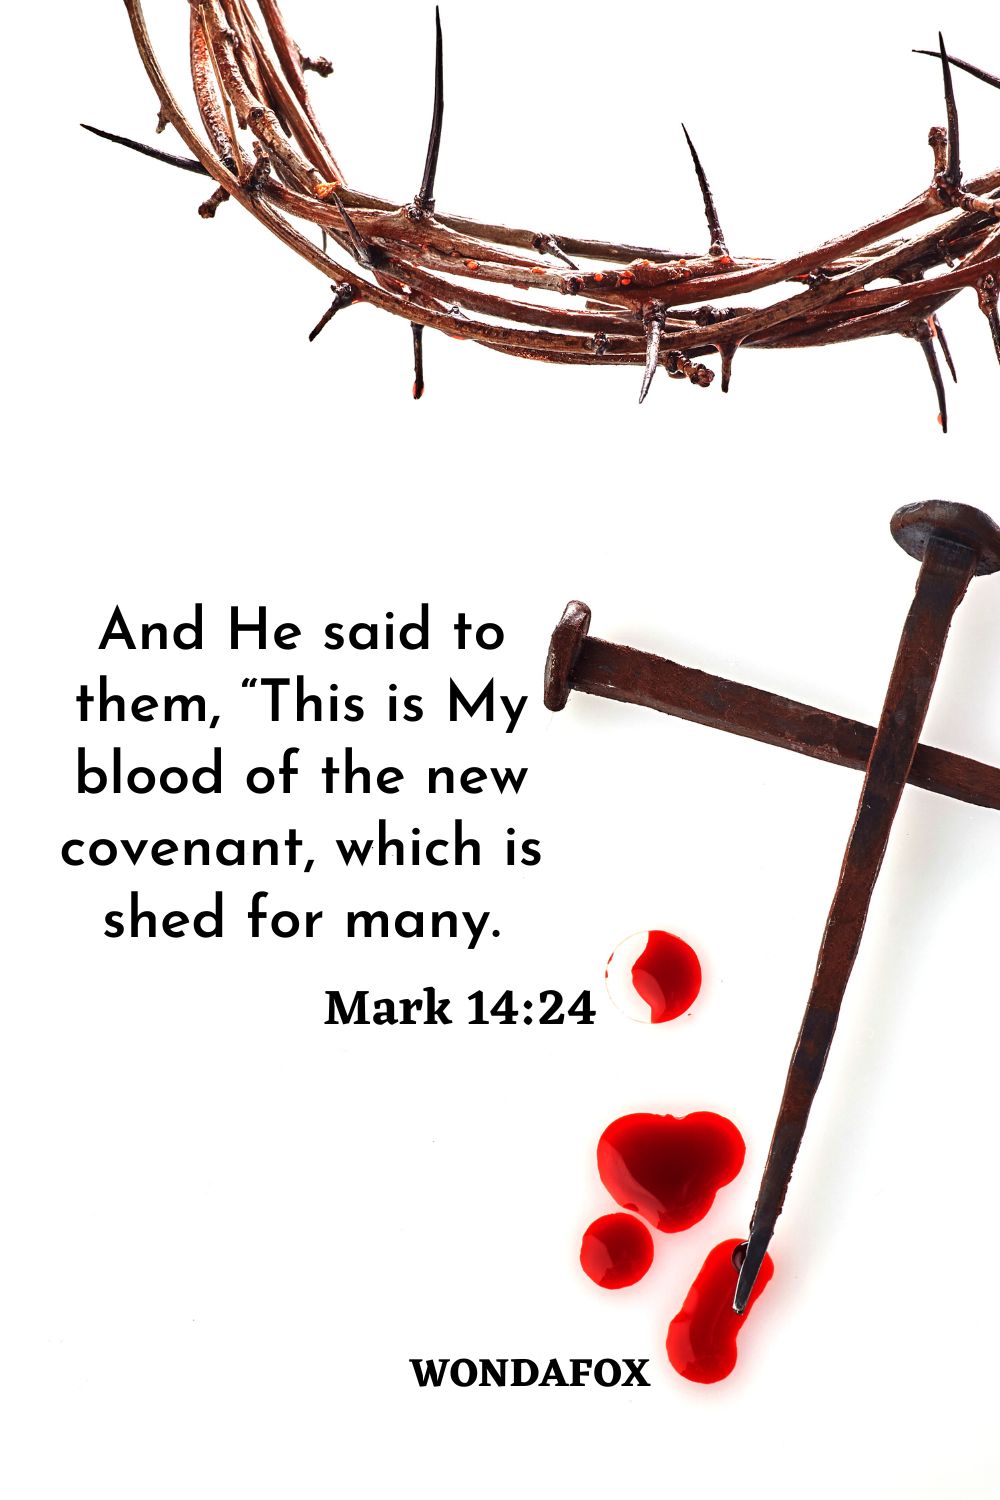 And He said to them, “This is My blood of the new covenant, which is shed for many.
Mark 14:24